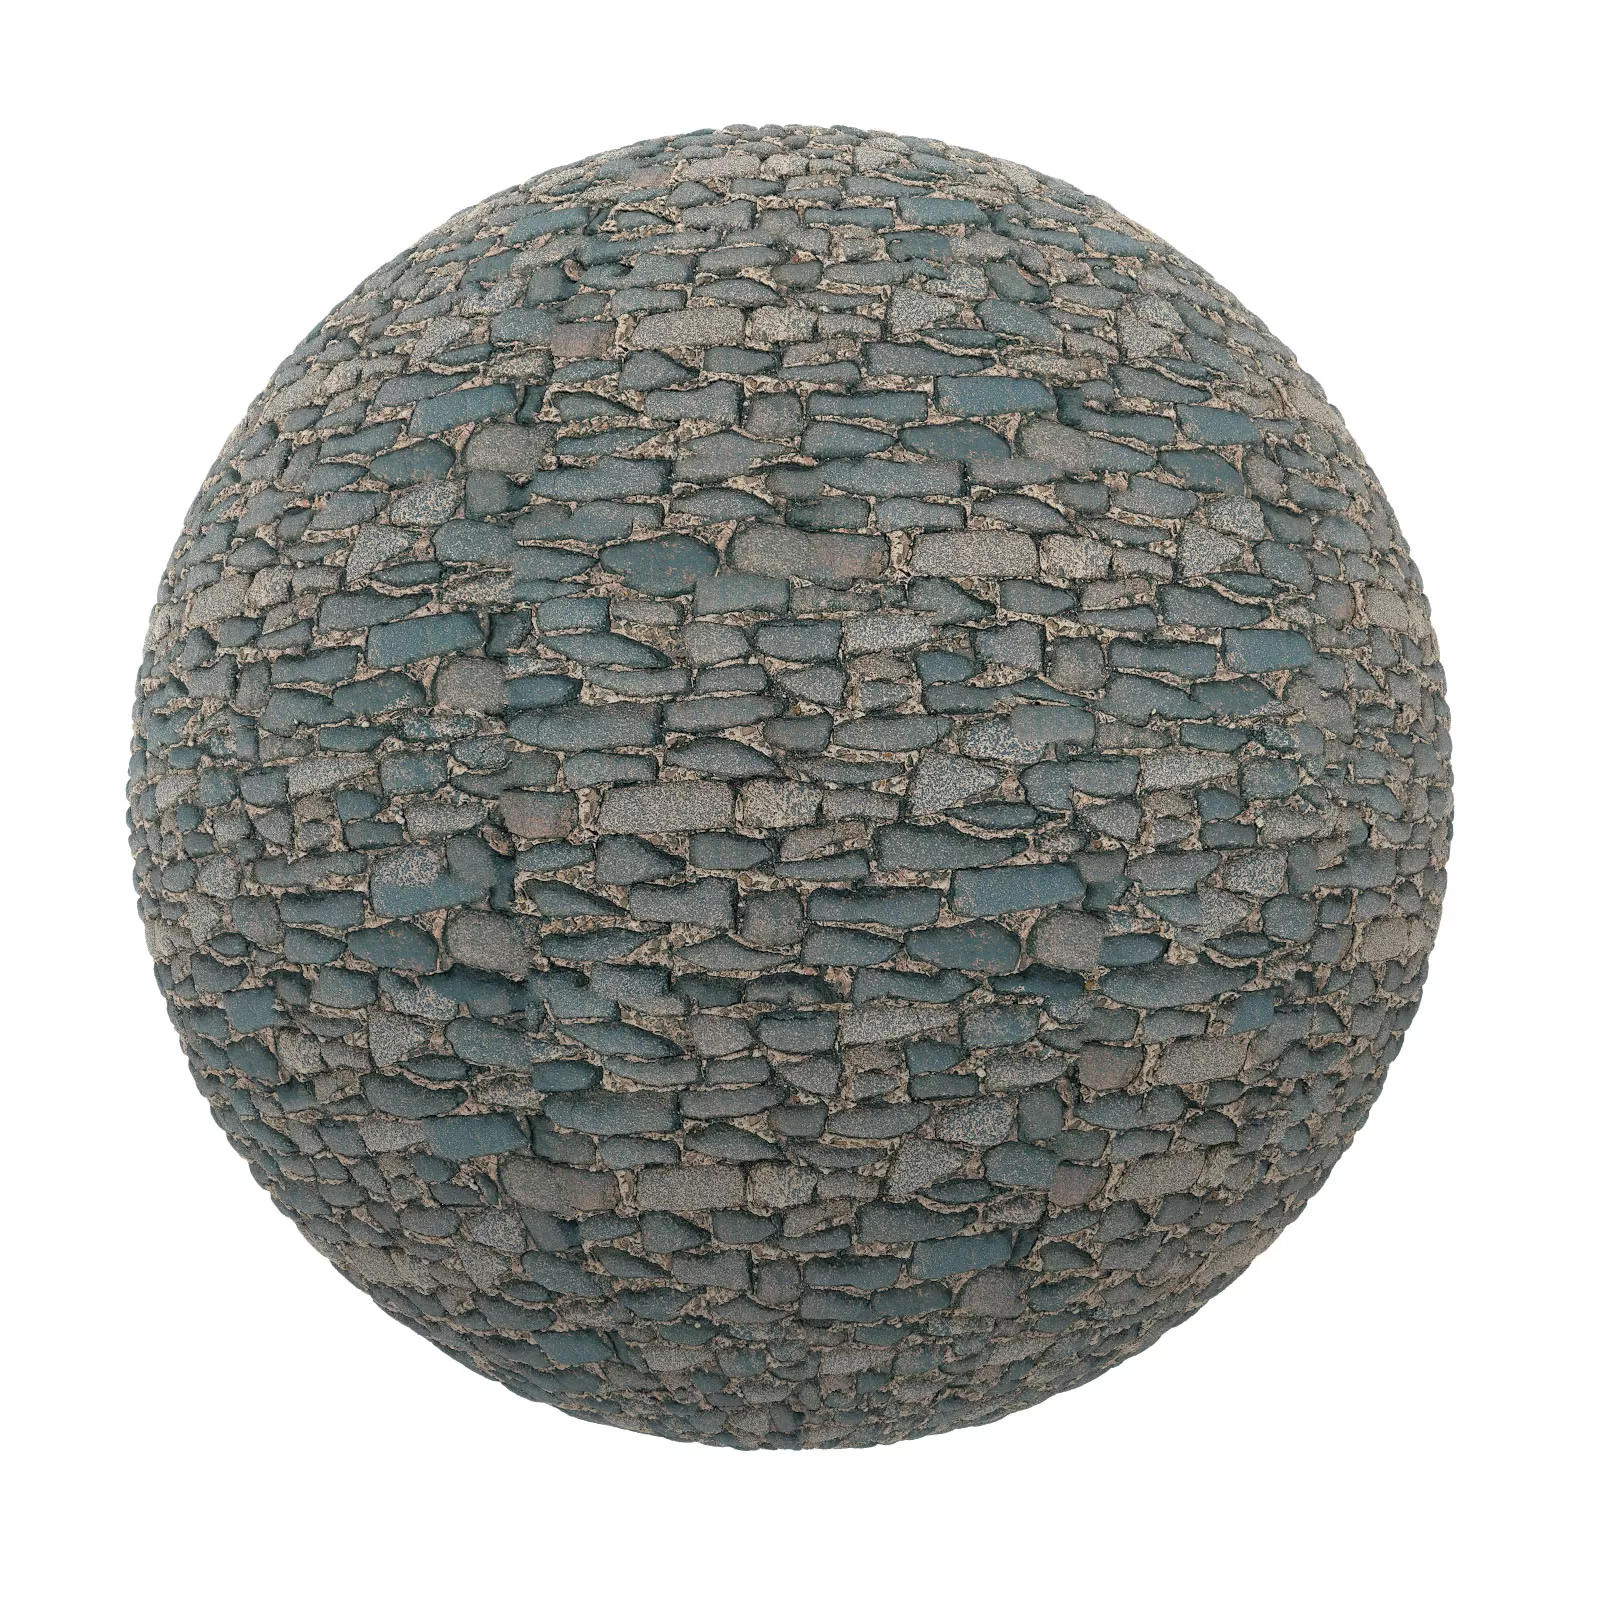 PBR CGAXIS TEXTURES – PAVEMENTS – Stone Pavement 13